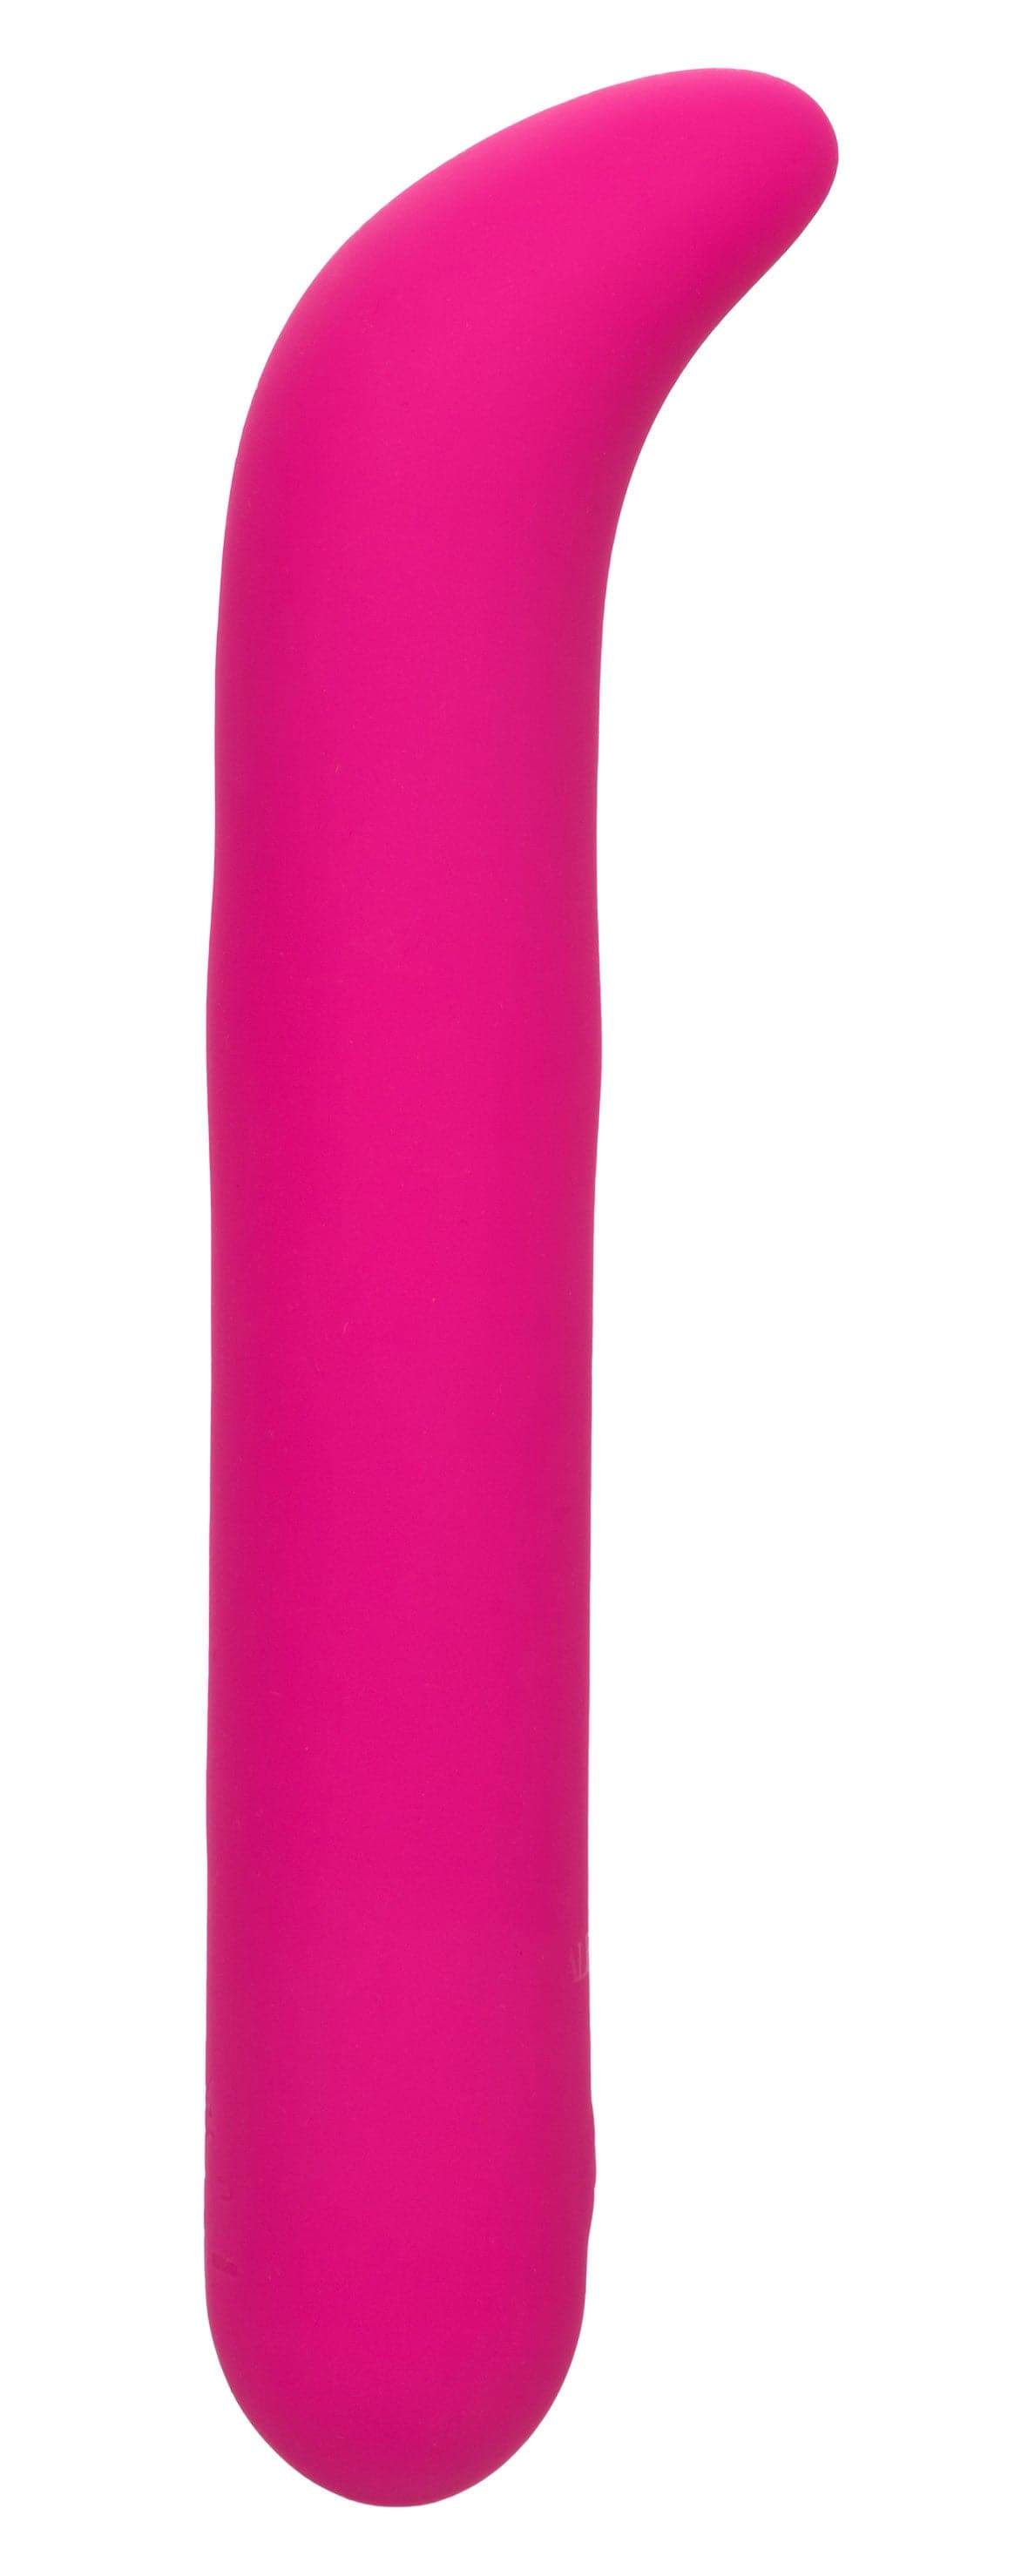 bliss liquid silicone g vibe pink